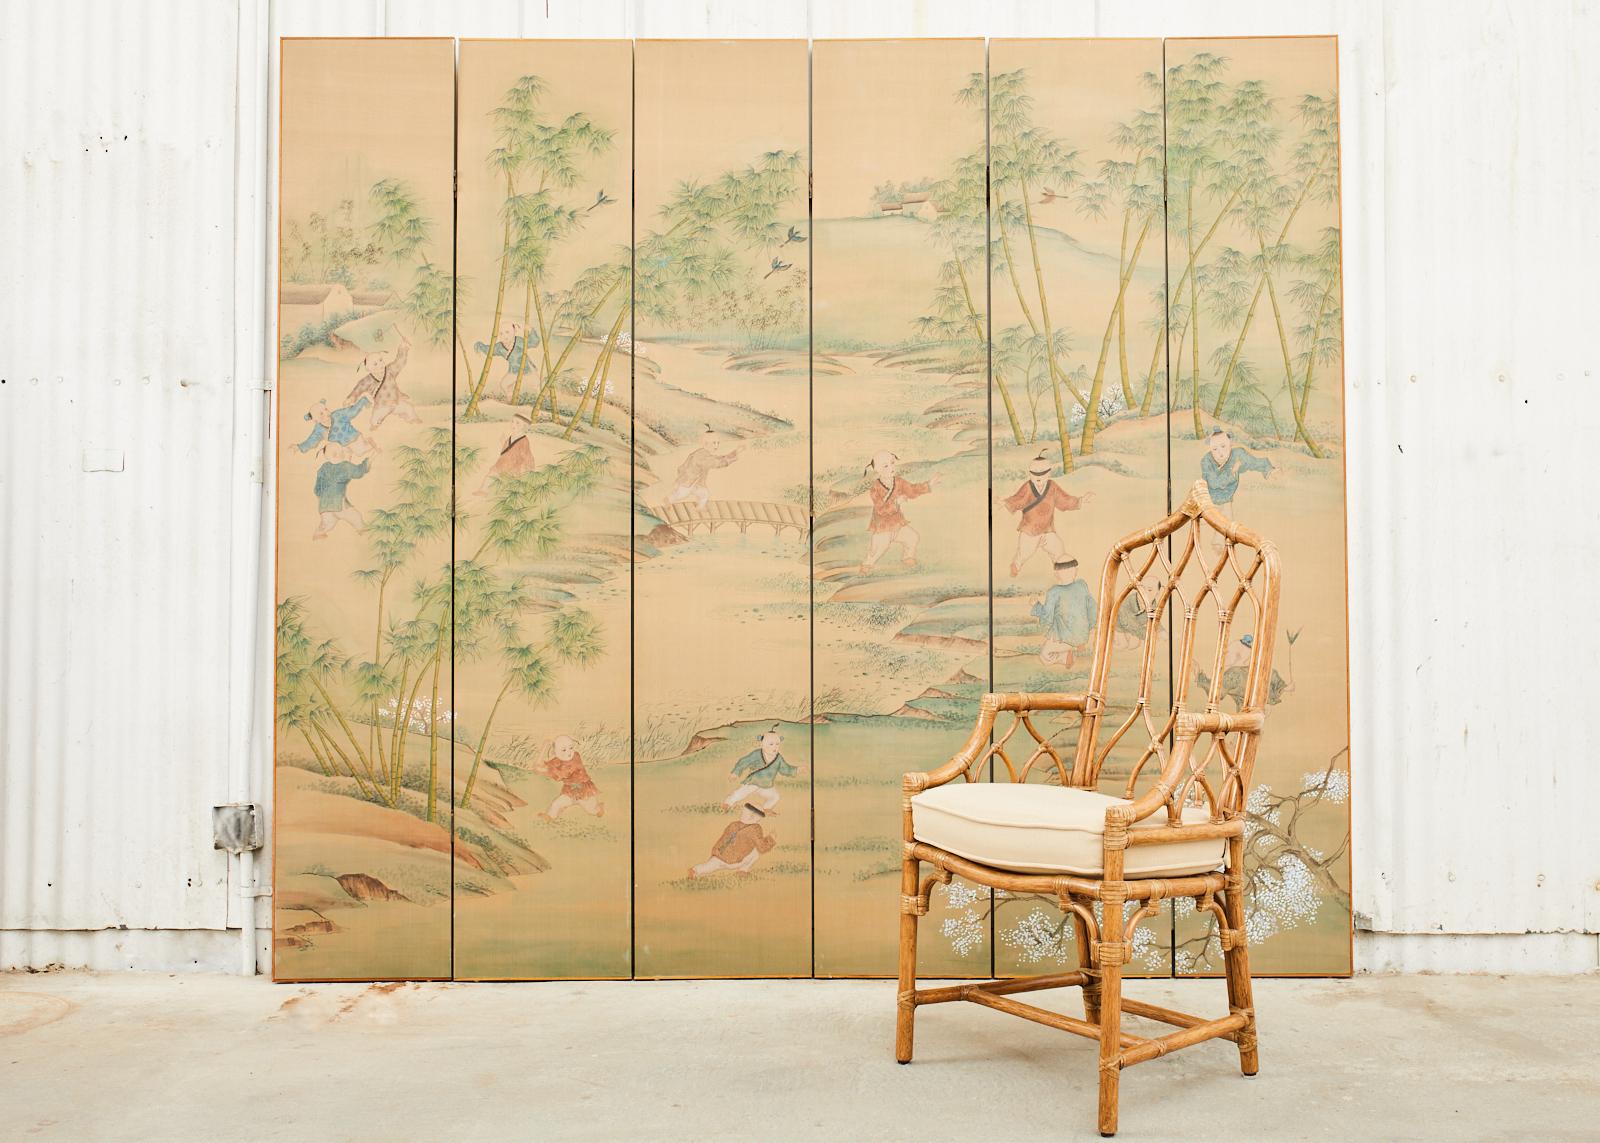 Spectacular Chinese six-panel silk folding wallpaper screen crafted in the manner and style of Gracie's exotic landscapes by Maitland-Smith in Hong Kong. The screen depicts a lush spring landscape with young boys at play among bamboo groves.